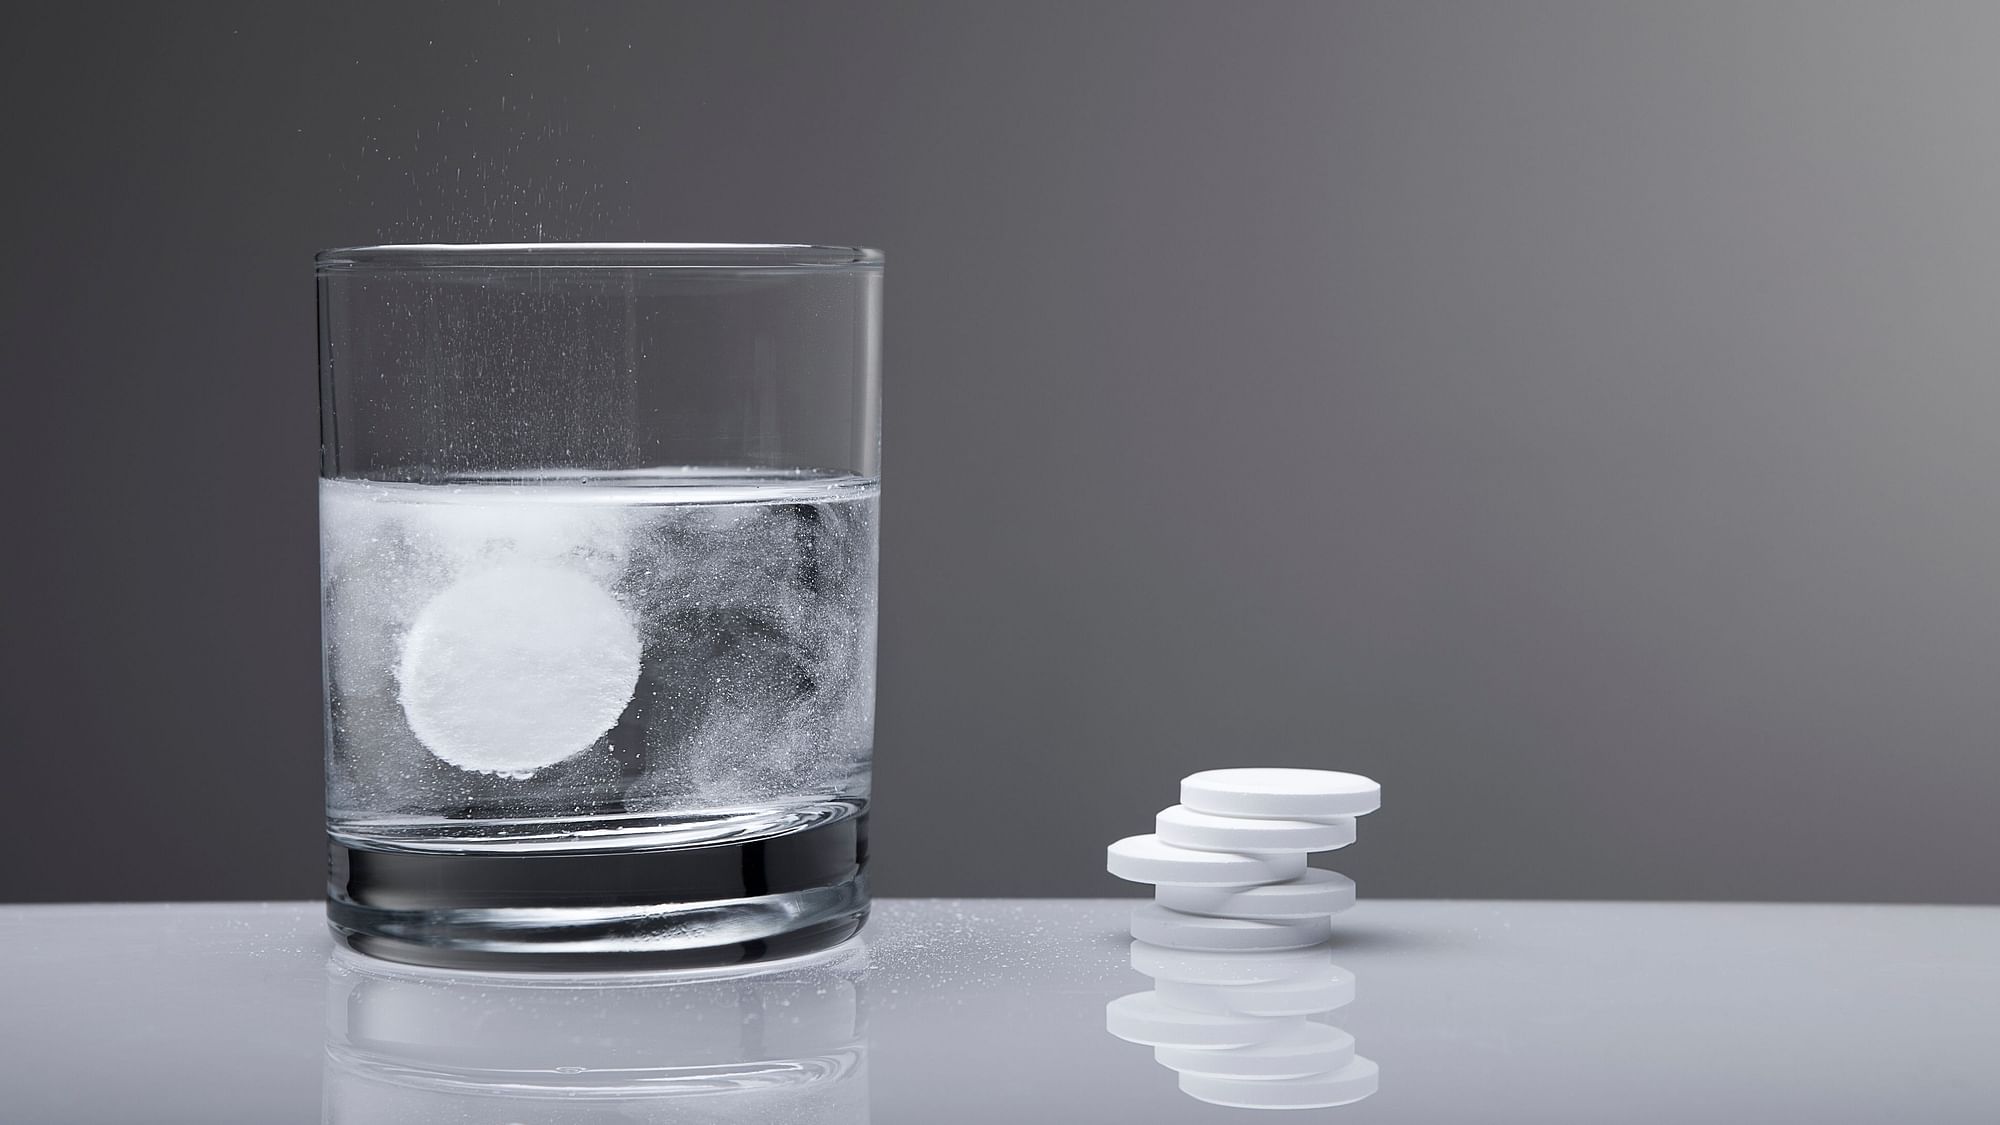 The reason aspirin isn’t currently being used to prevent these diseases is because taking too much of any anti-inflammatory eats at the stomach’s mucus lining.